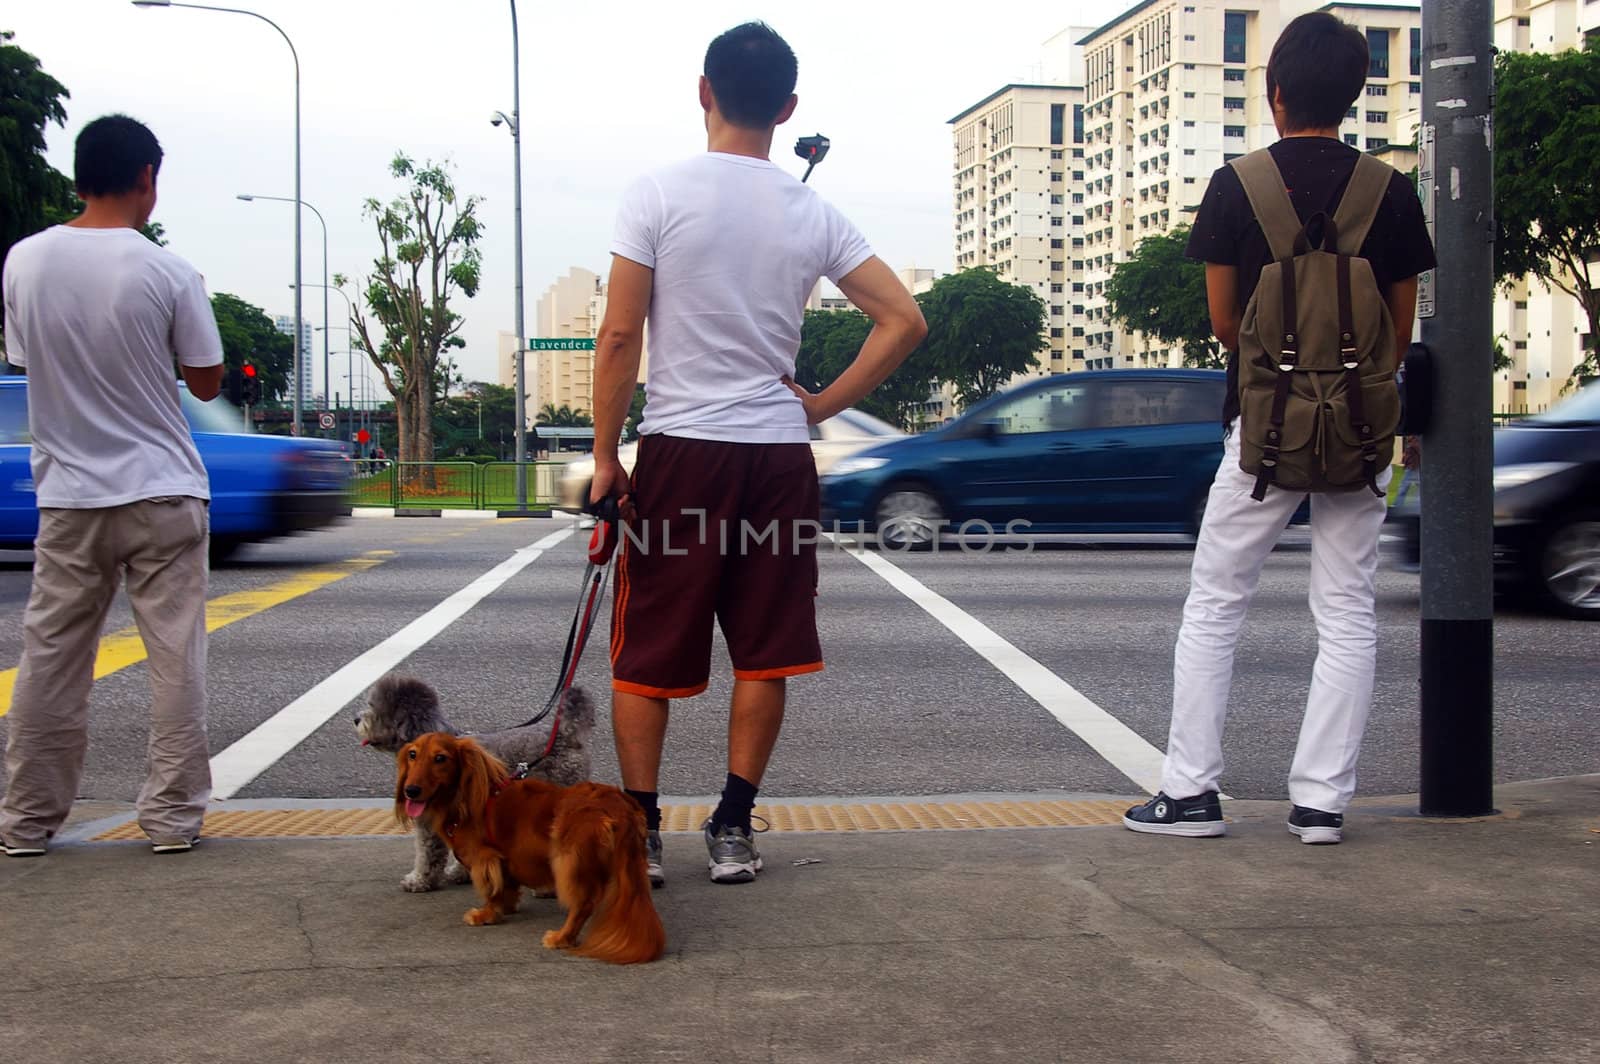 Pedestrians and dogs waiting to cross the road, Lavender street, Singapore.